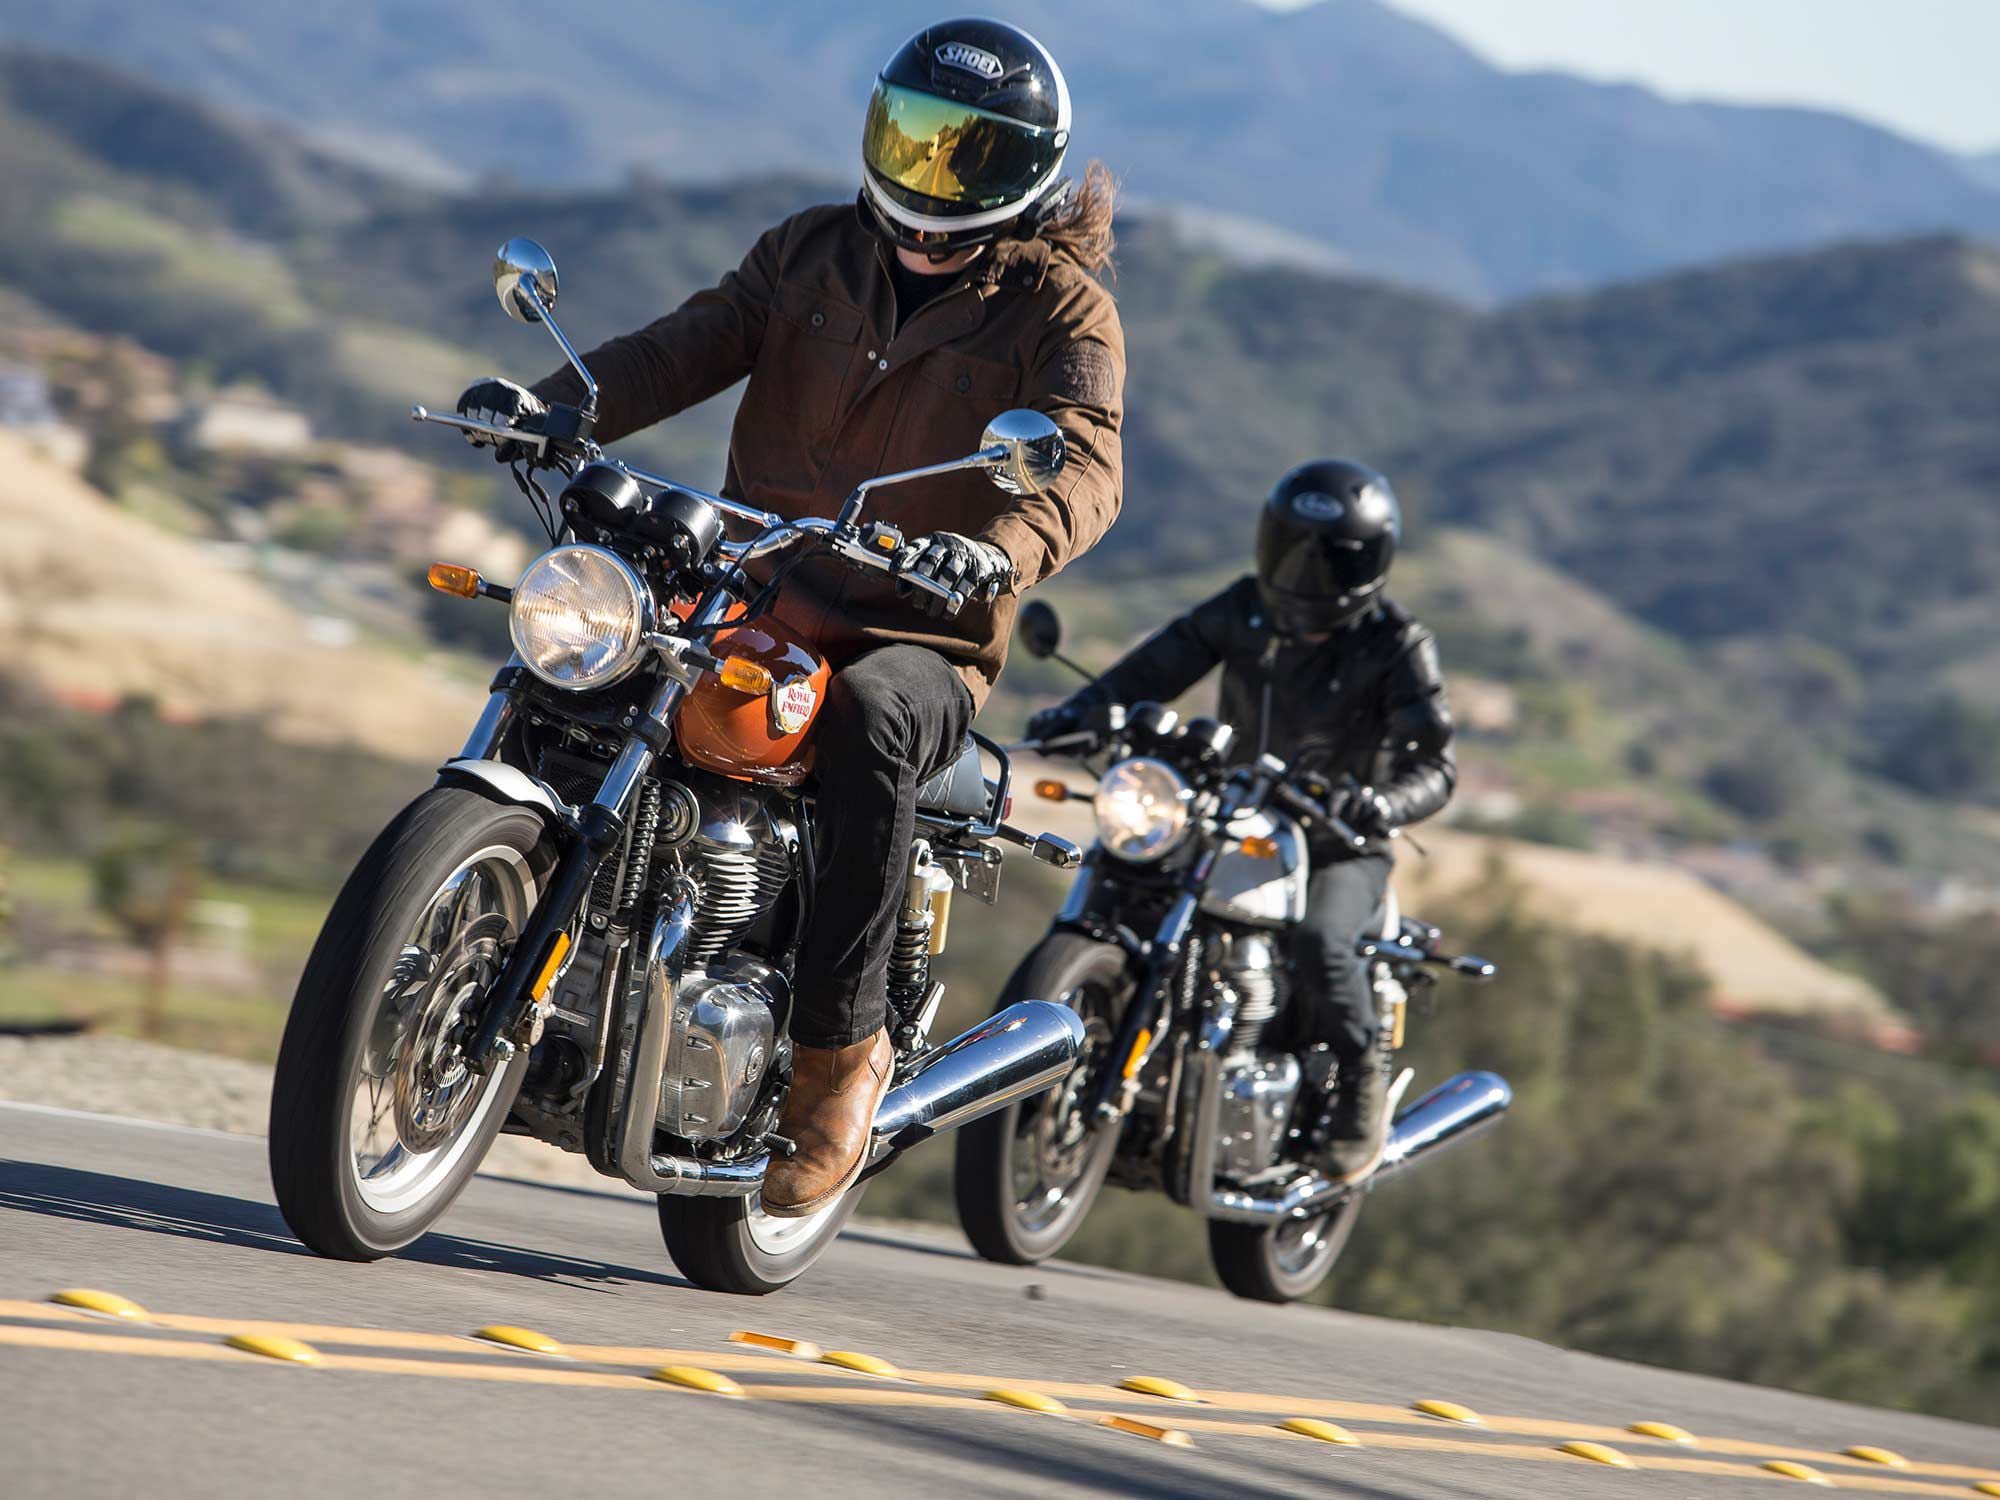 Riding with friends is one of the great joys of motorcycling, but it’s important to respect each individual’s skill level to maintain a safe ride.